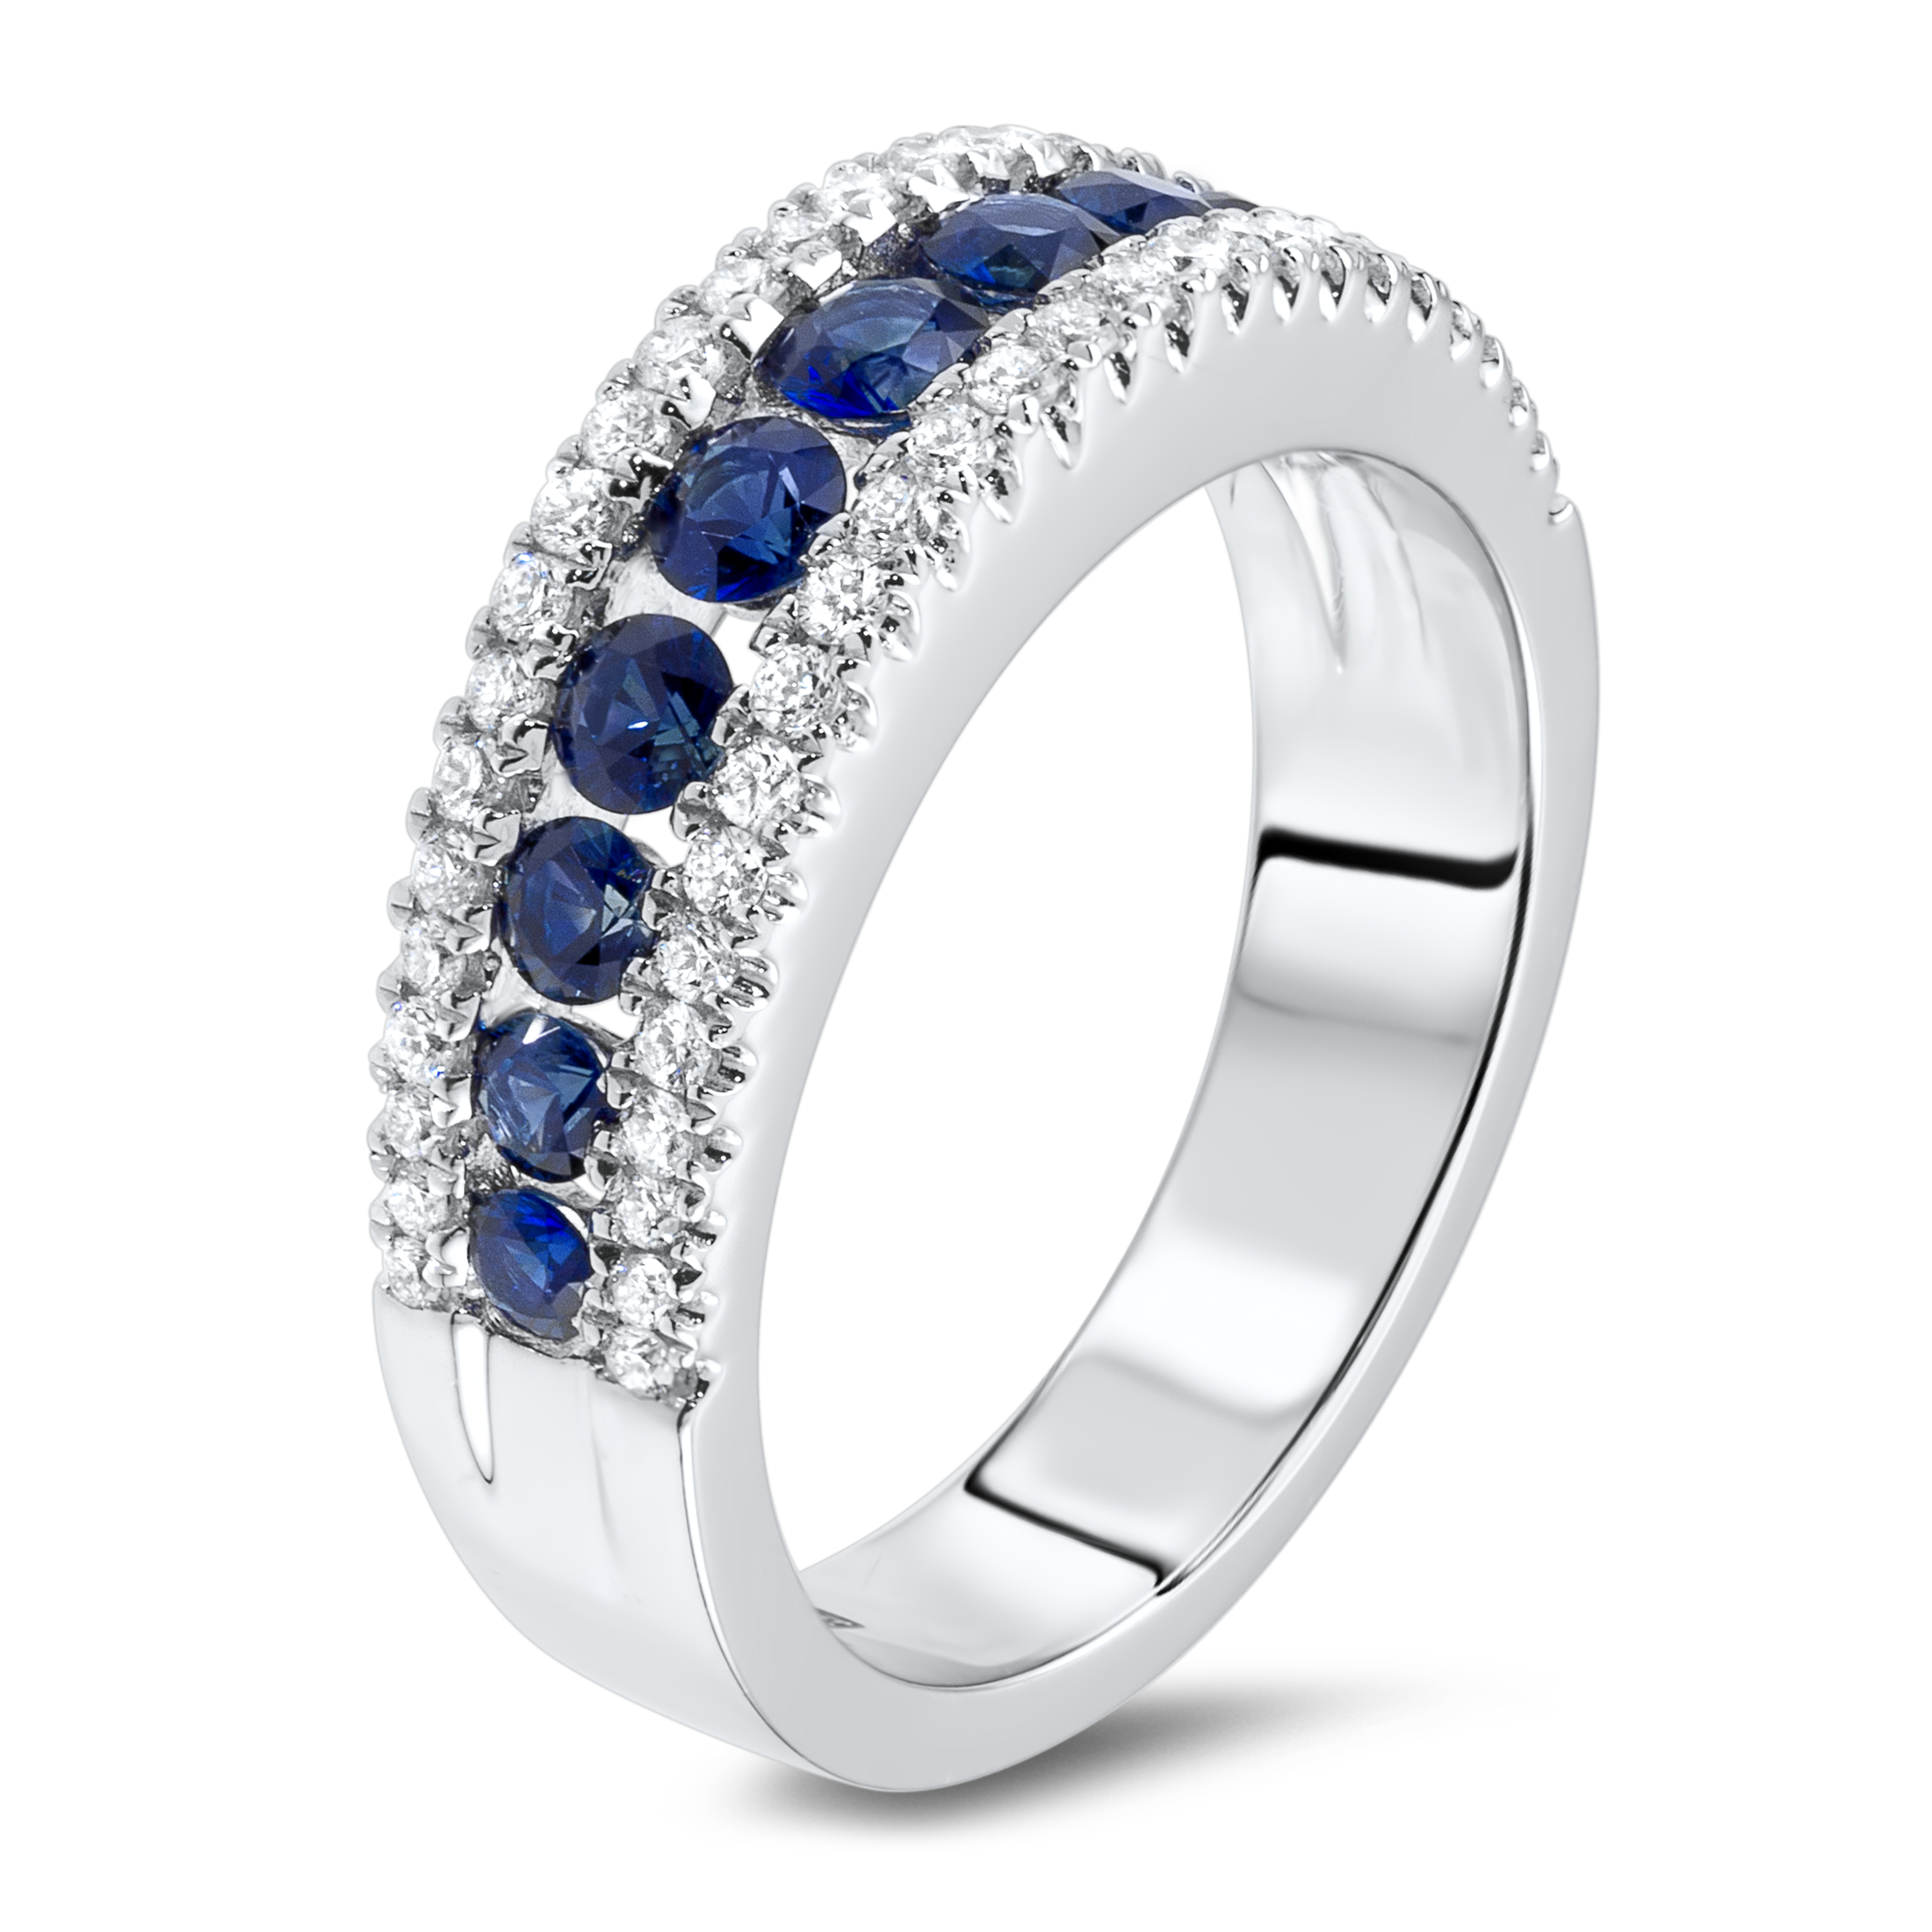 Jewellery Ring File PNG Image